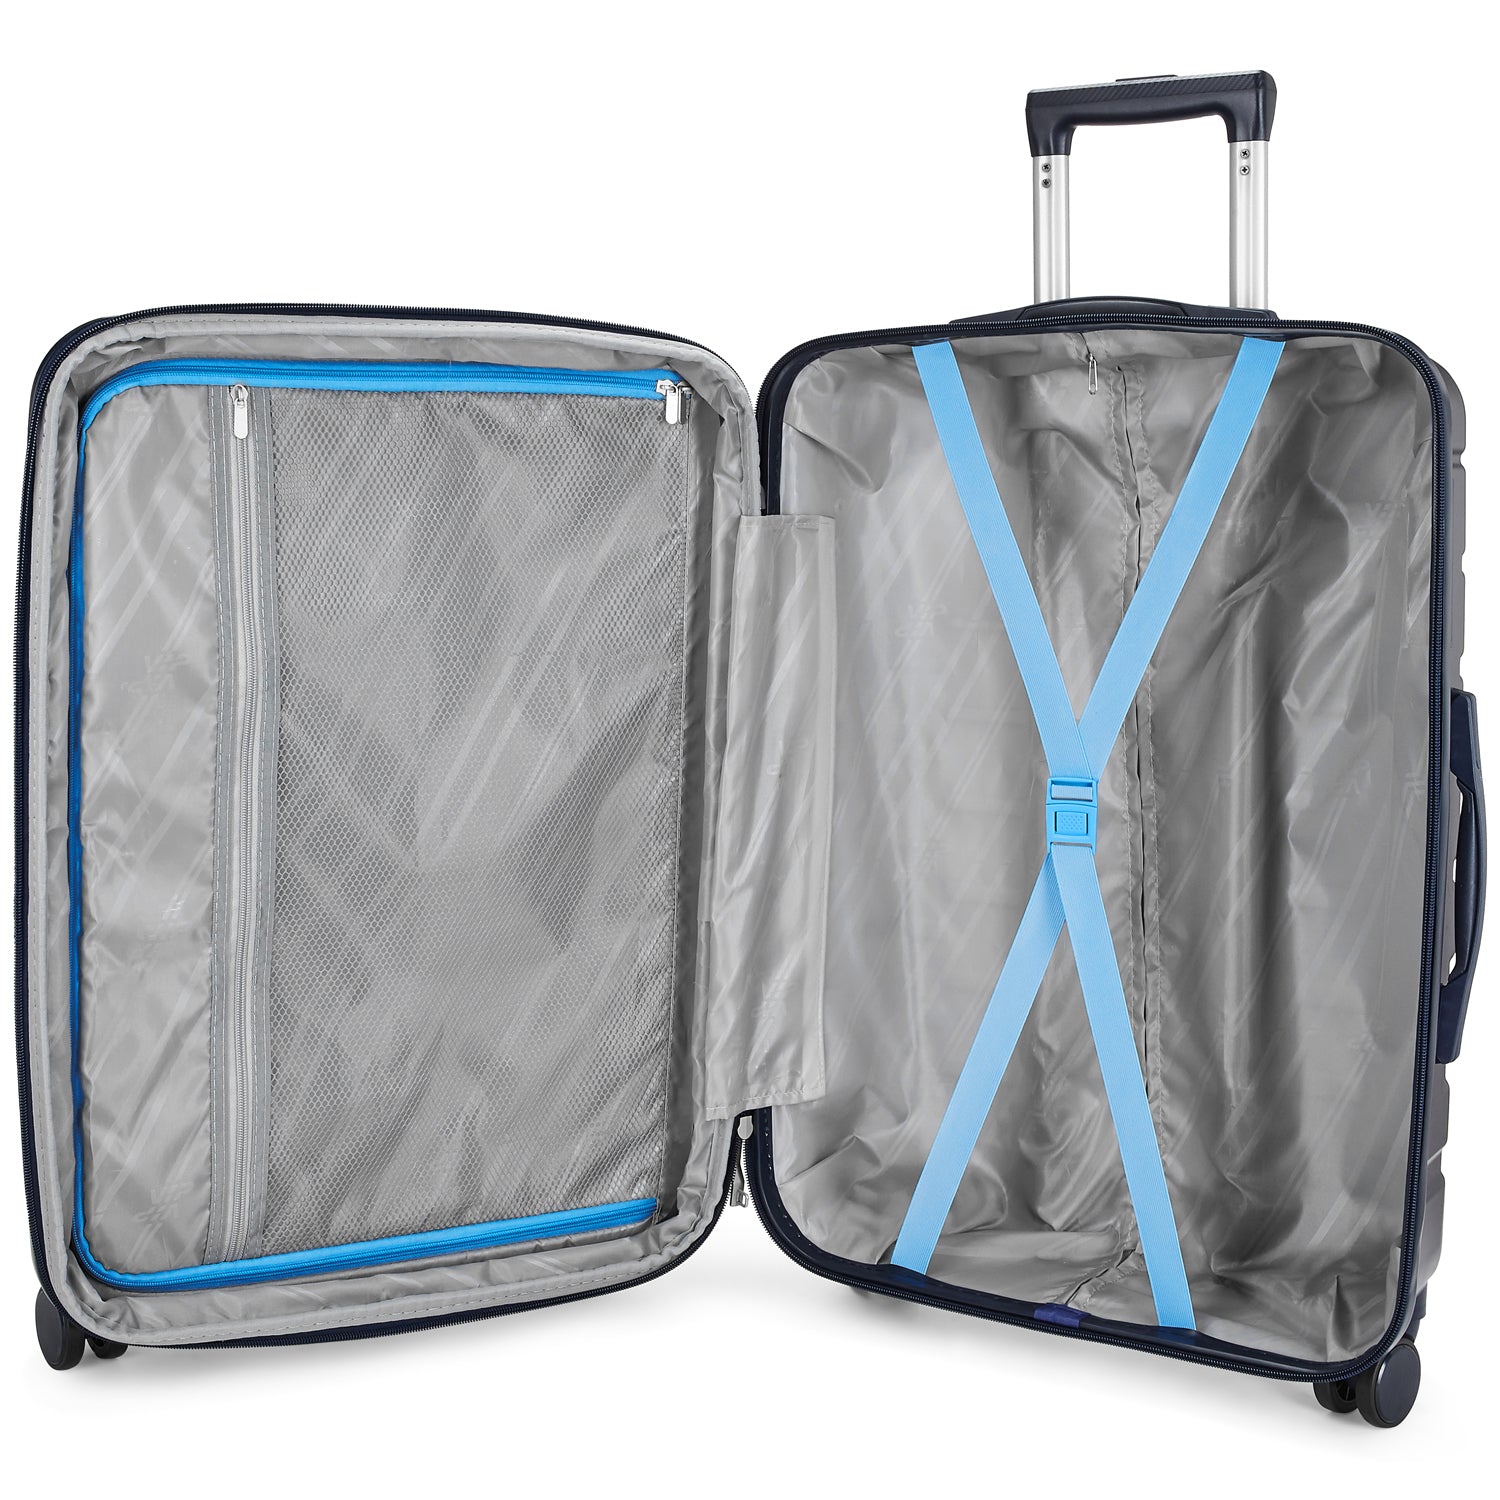 VIP Hard Trolley Bag Medium Size | 8 Wheel Luggage Bag 65 cm with TSA Lock  | Durable Check in Suitcase for Travel (Blue) - QualiCorp Gifts Services